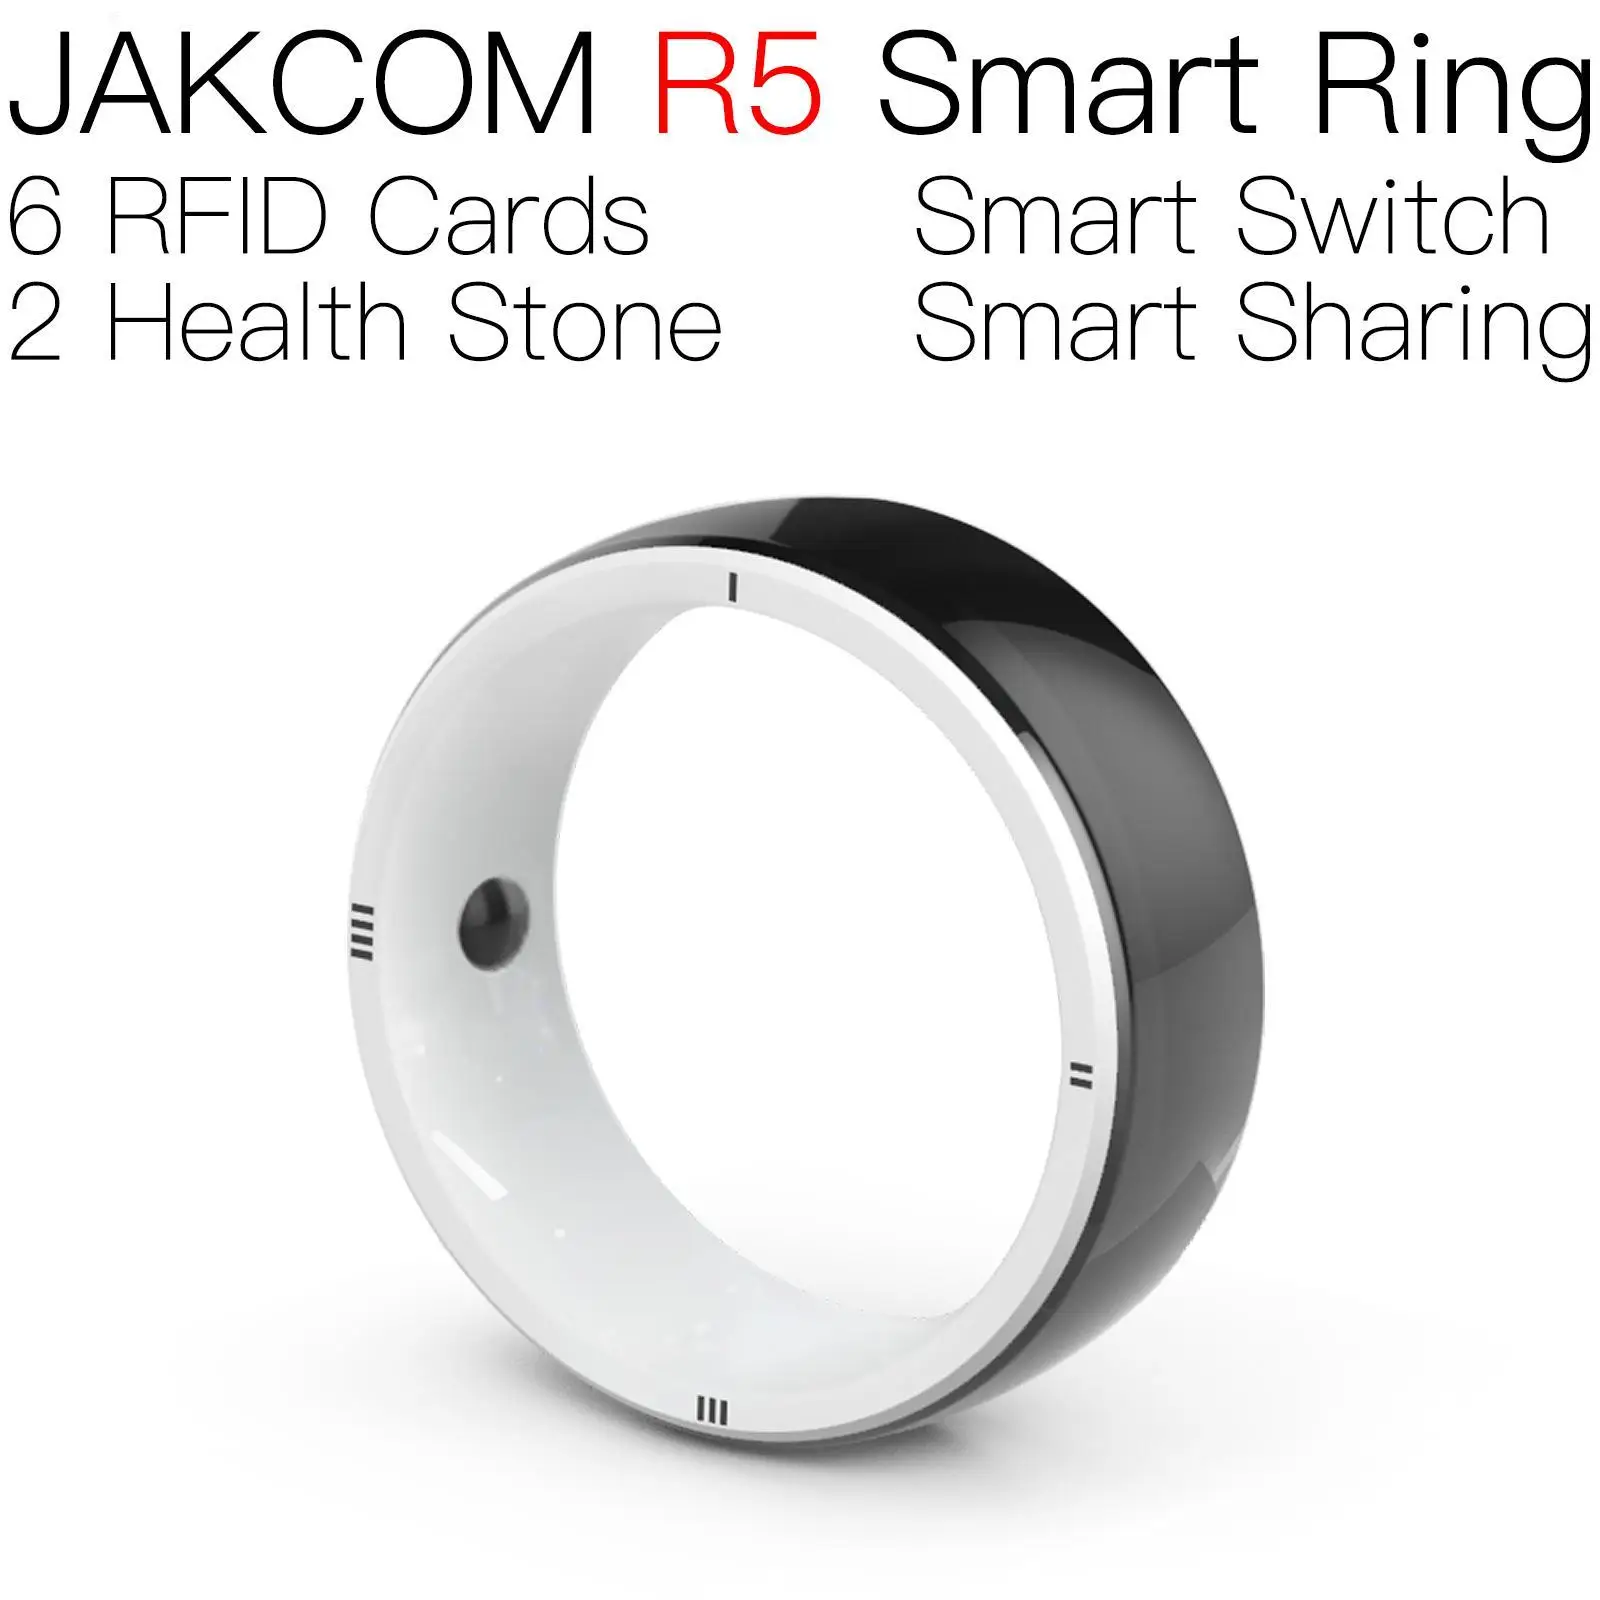 

JAKCOM R5 Smart Ring Super value than smart business card nfc with logo t mobile chip rfid tag emulator ear tags antena uhf